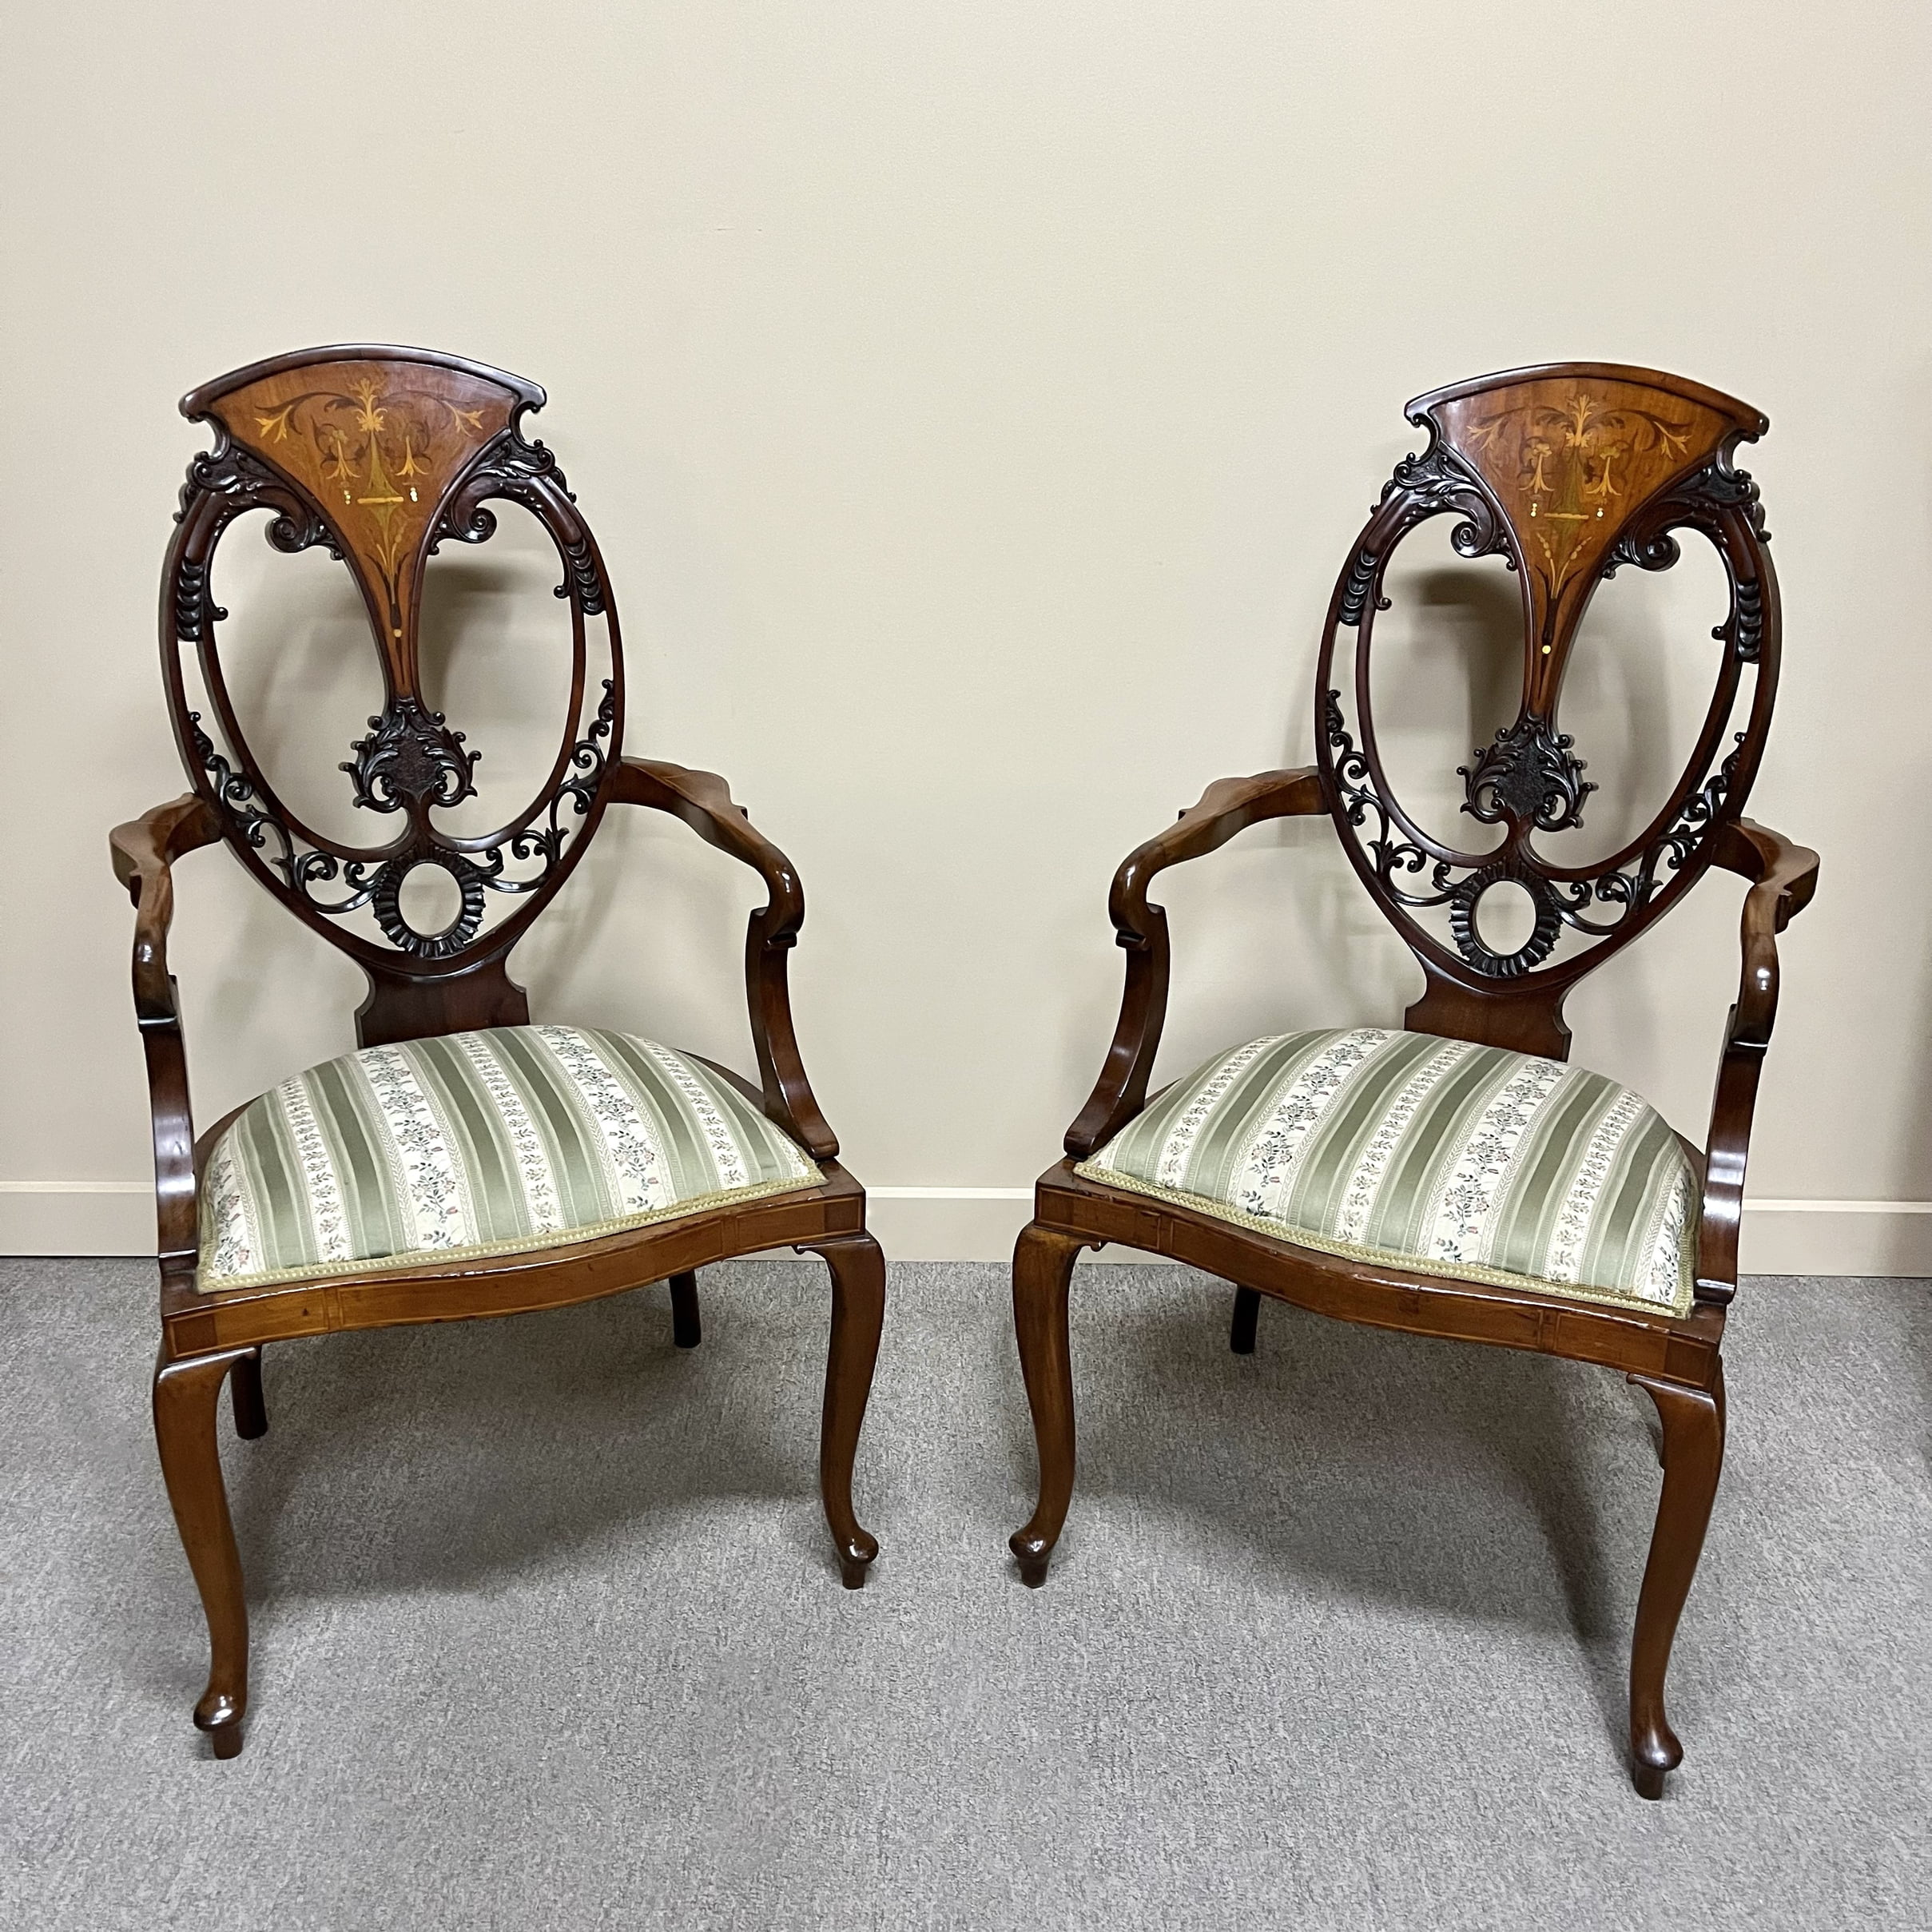 Pair of Sheraton Revival Chairs c.1900